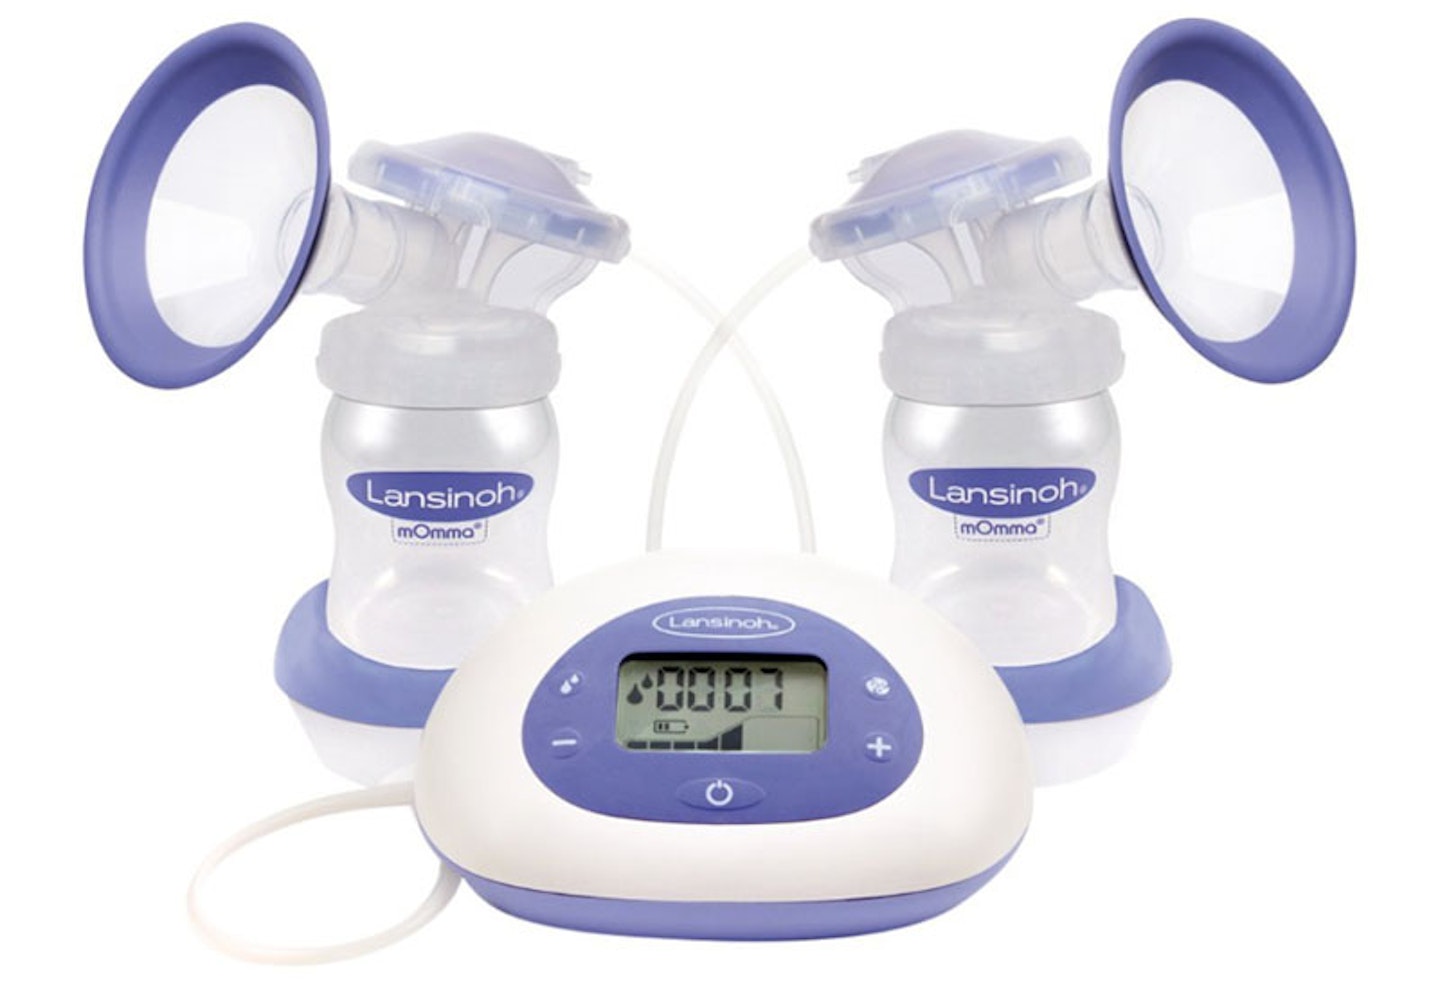 Lansinoh 2in1 Double Electric Breast Pump